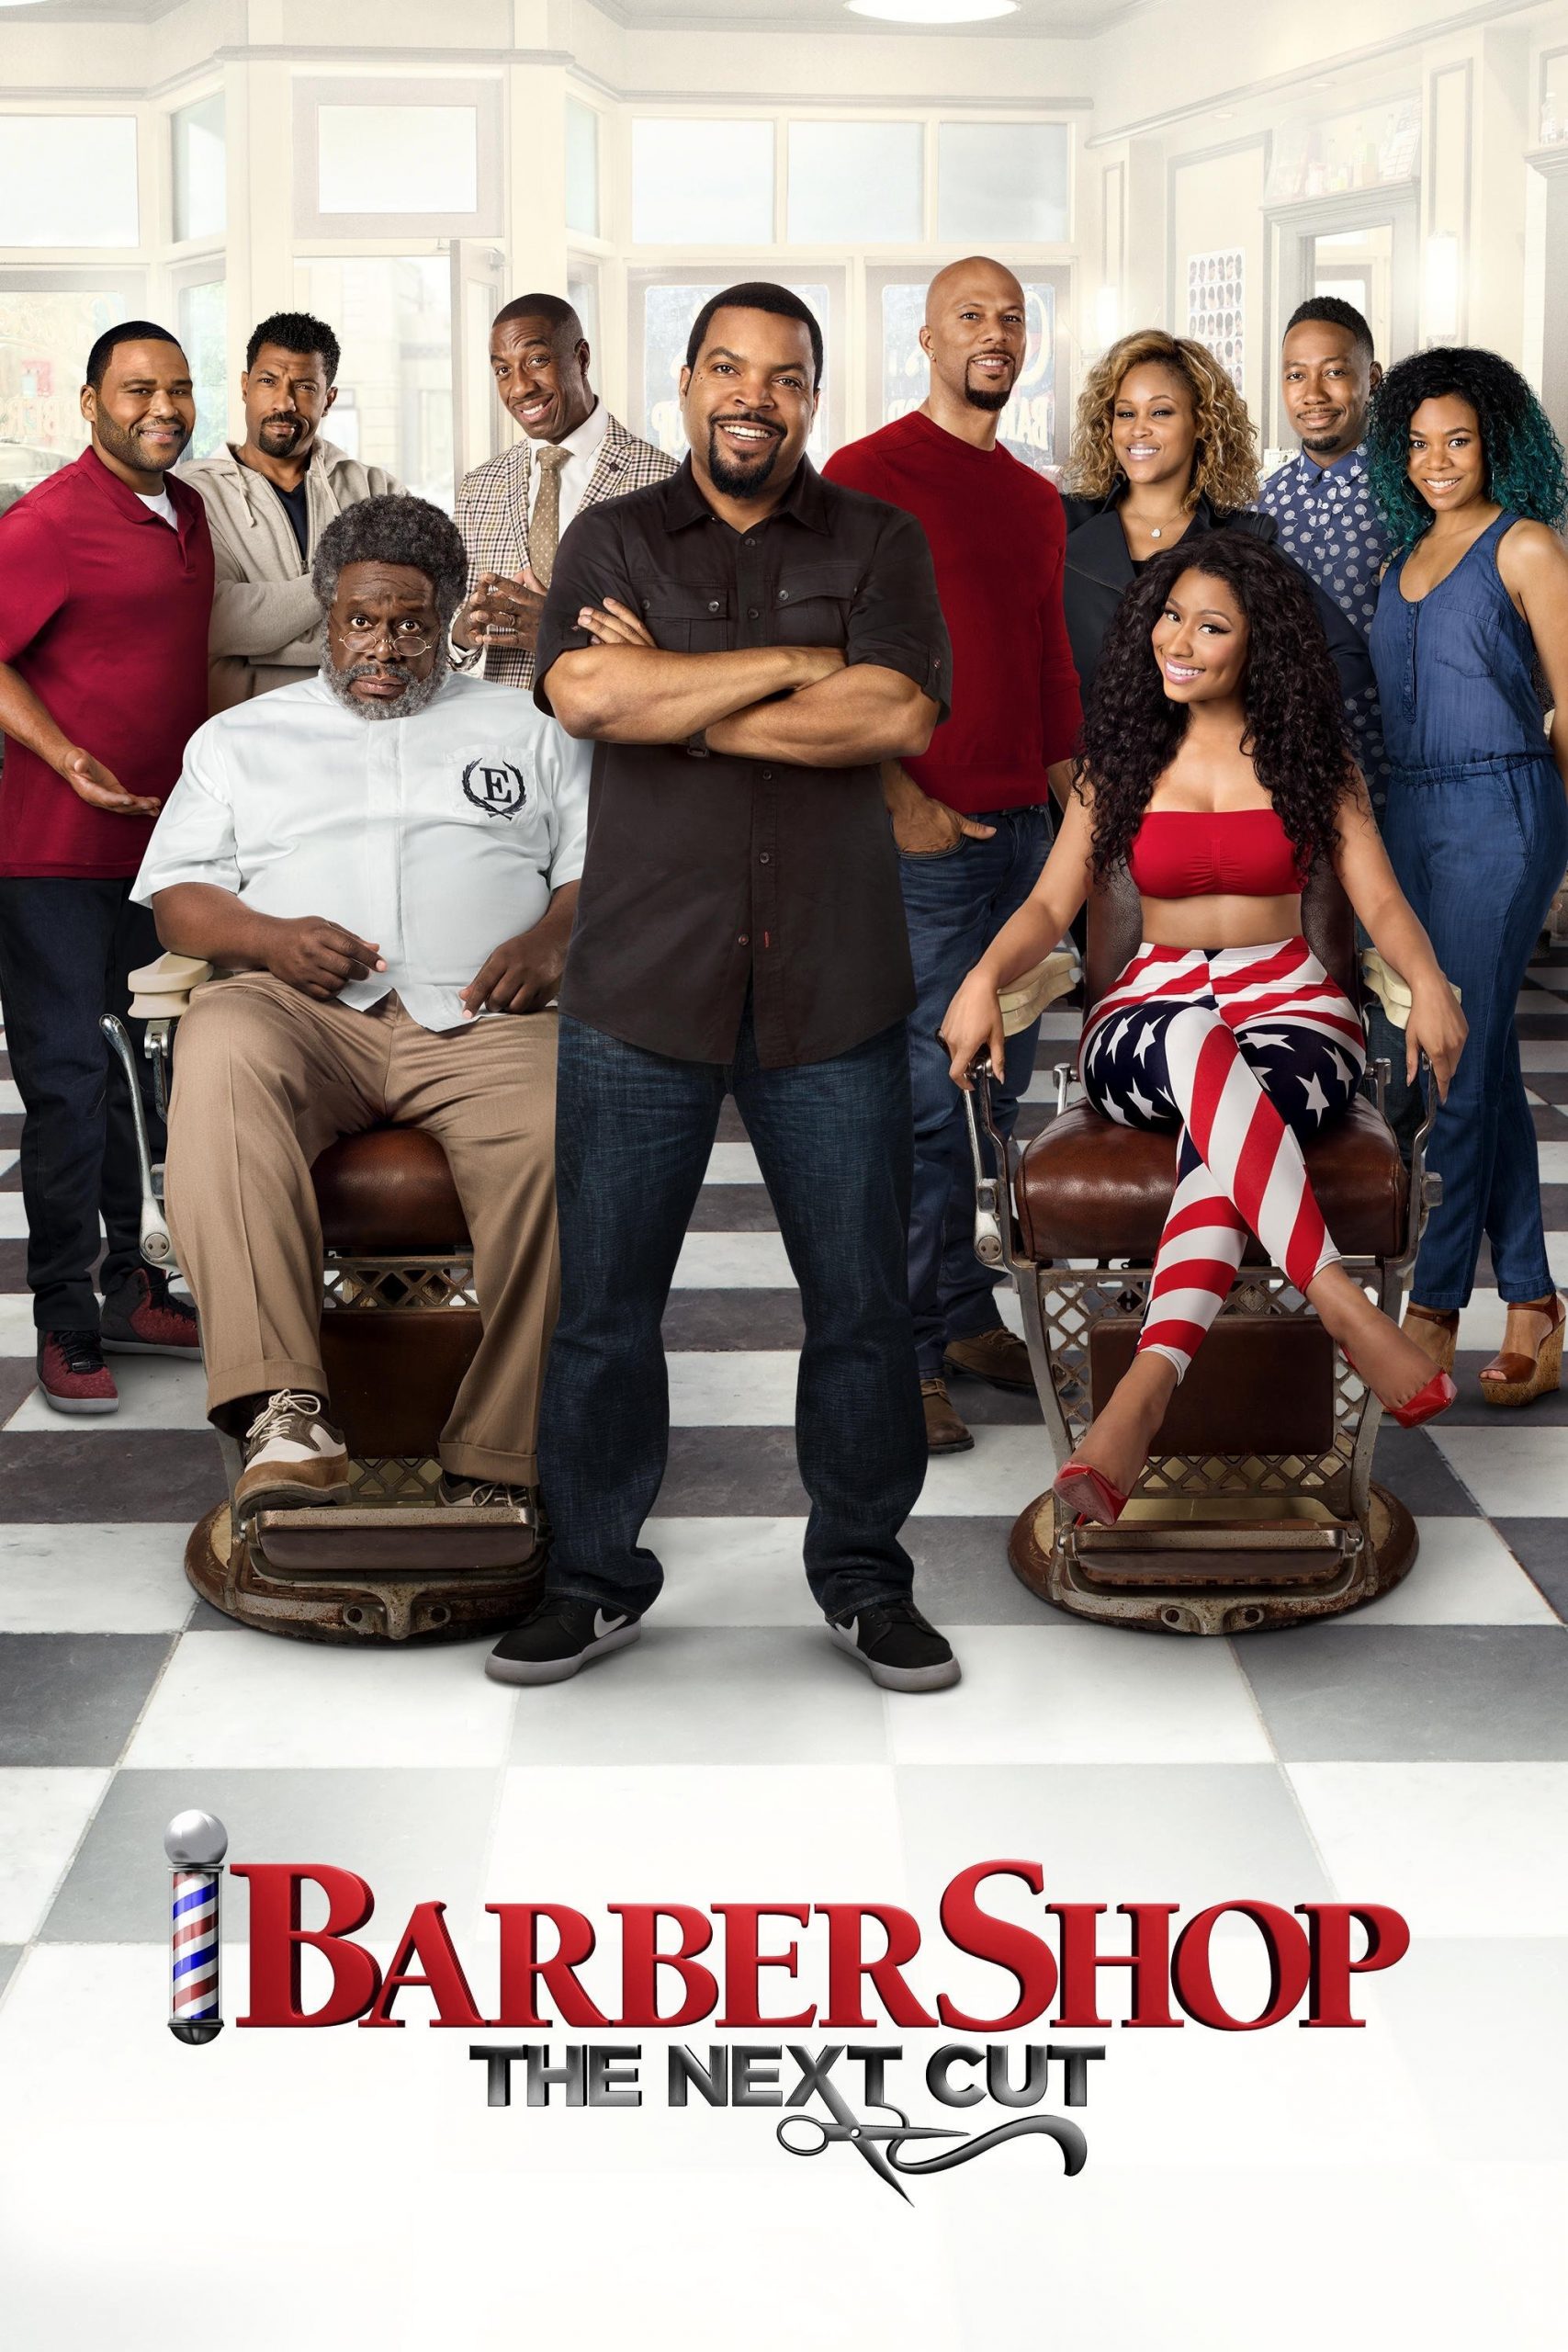 Poster for the movie "Barbershop: The Next Cut"